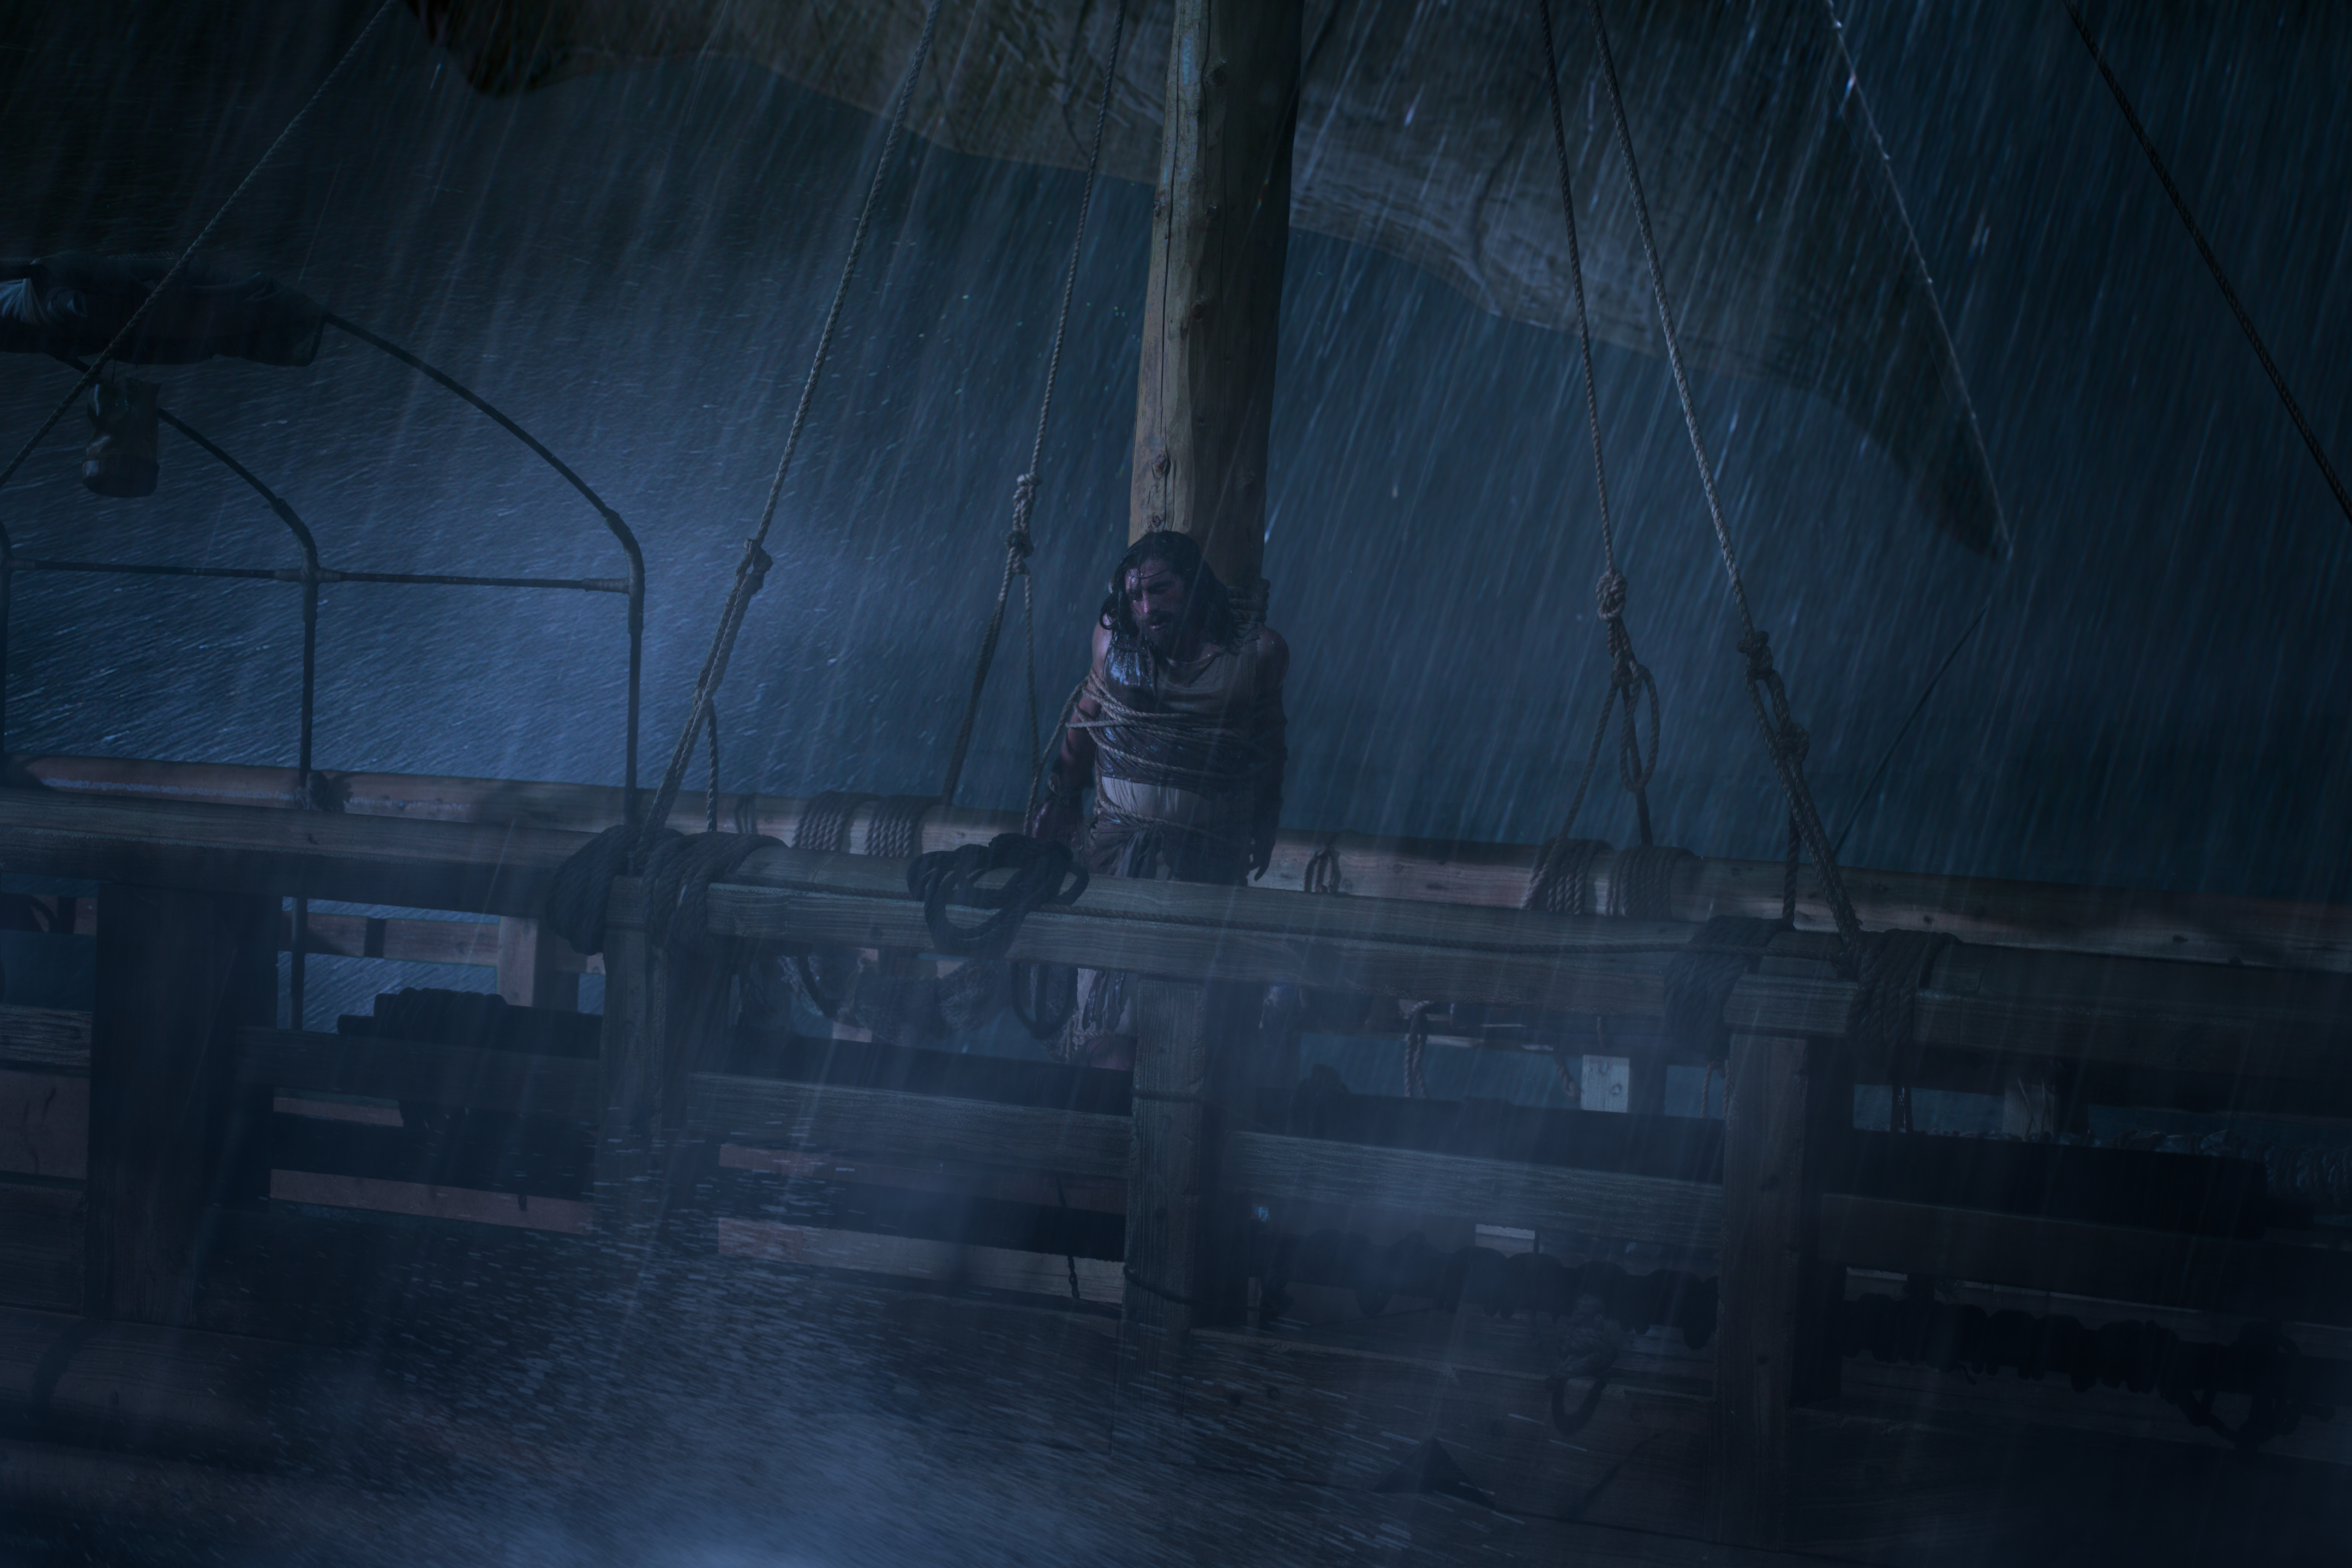 Nephi is tied to the ship's mast as a storm rages around him.